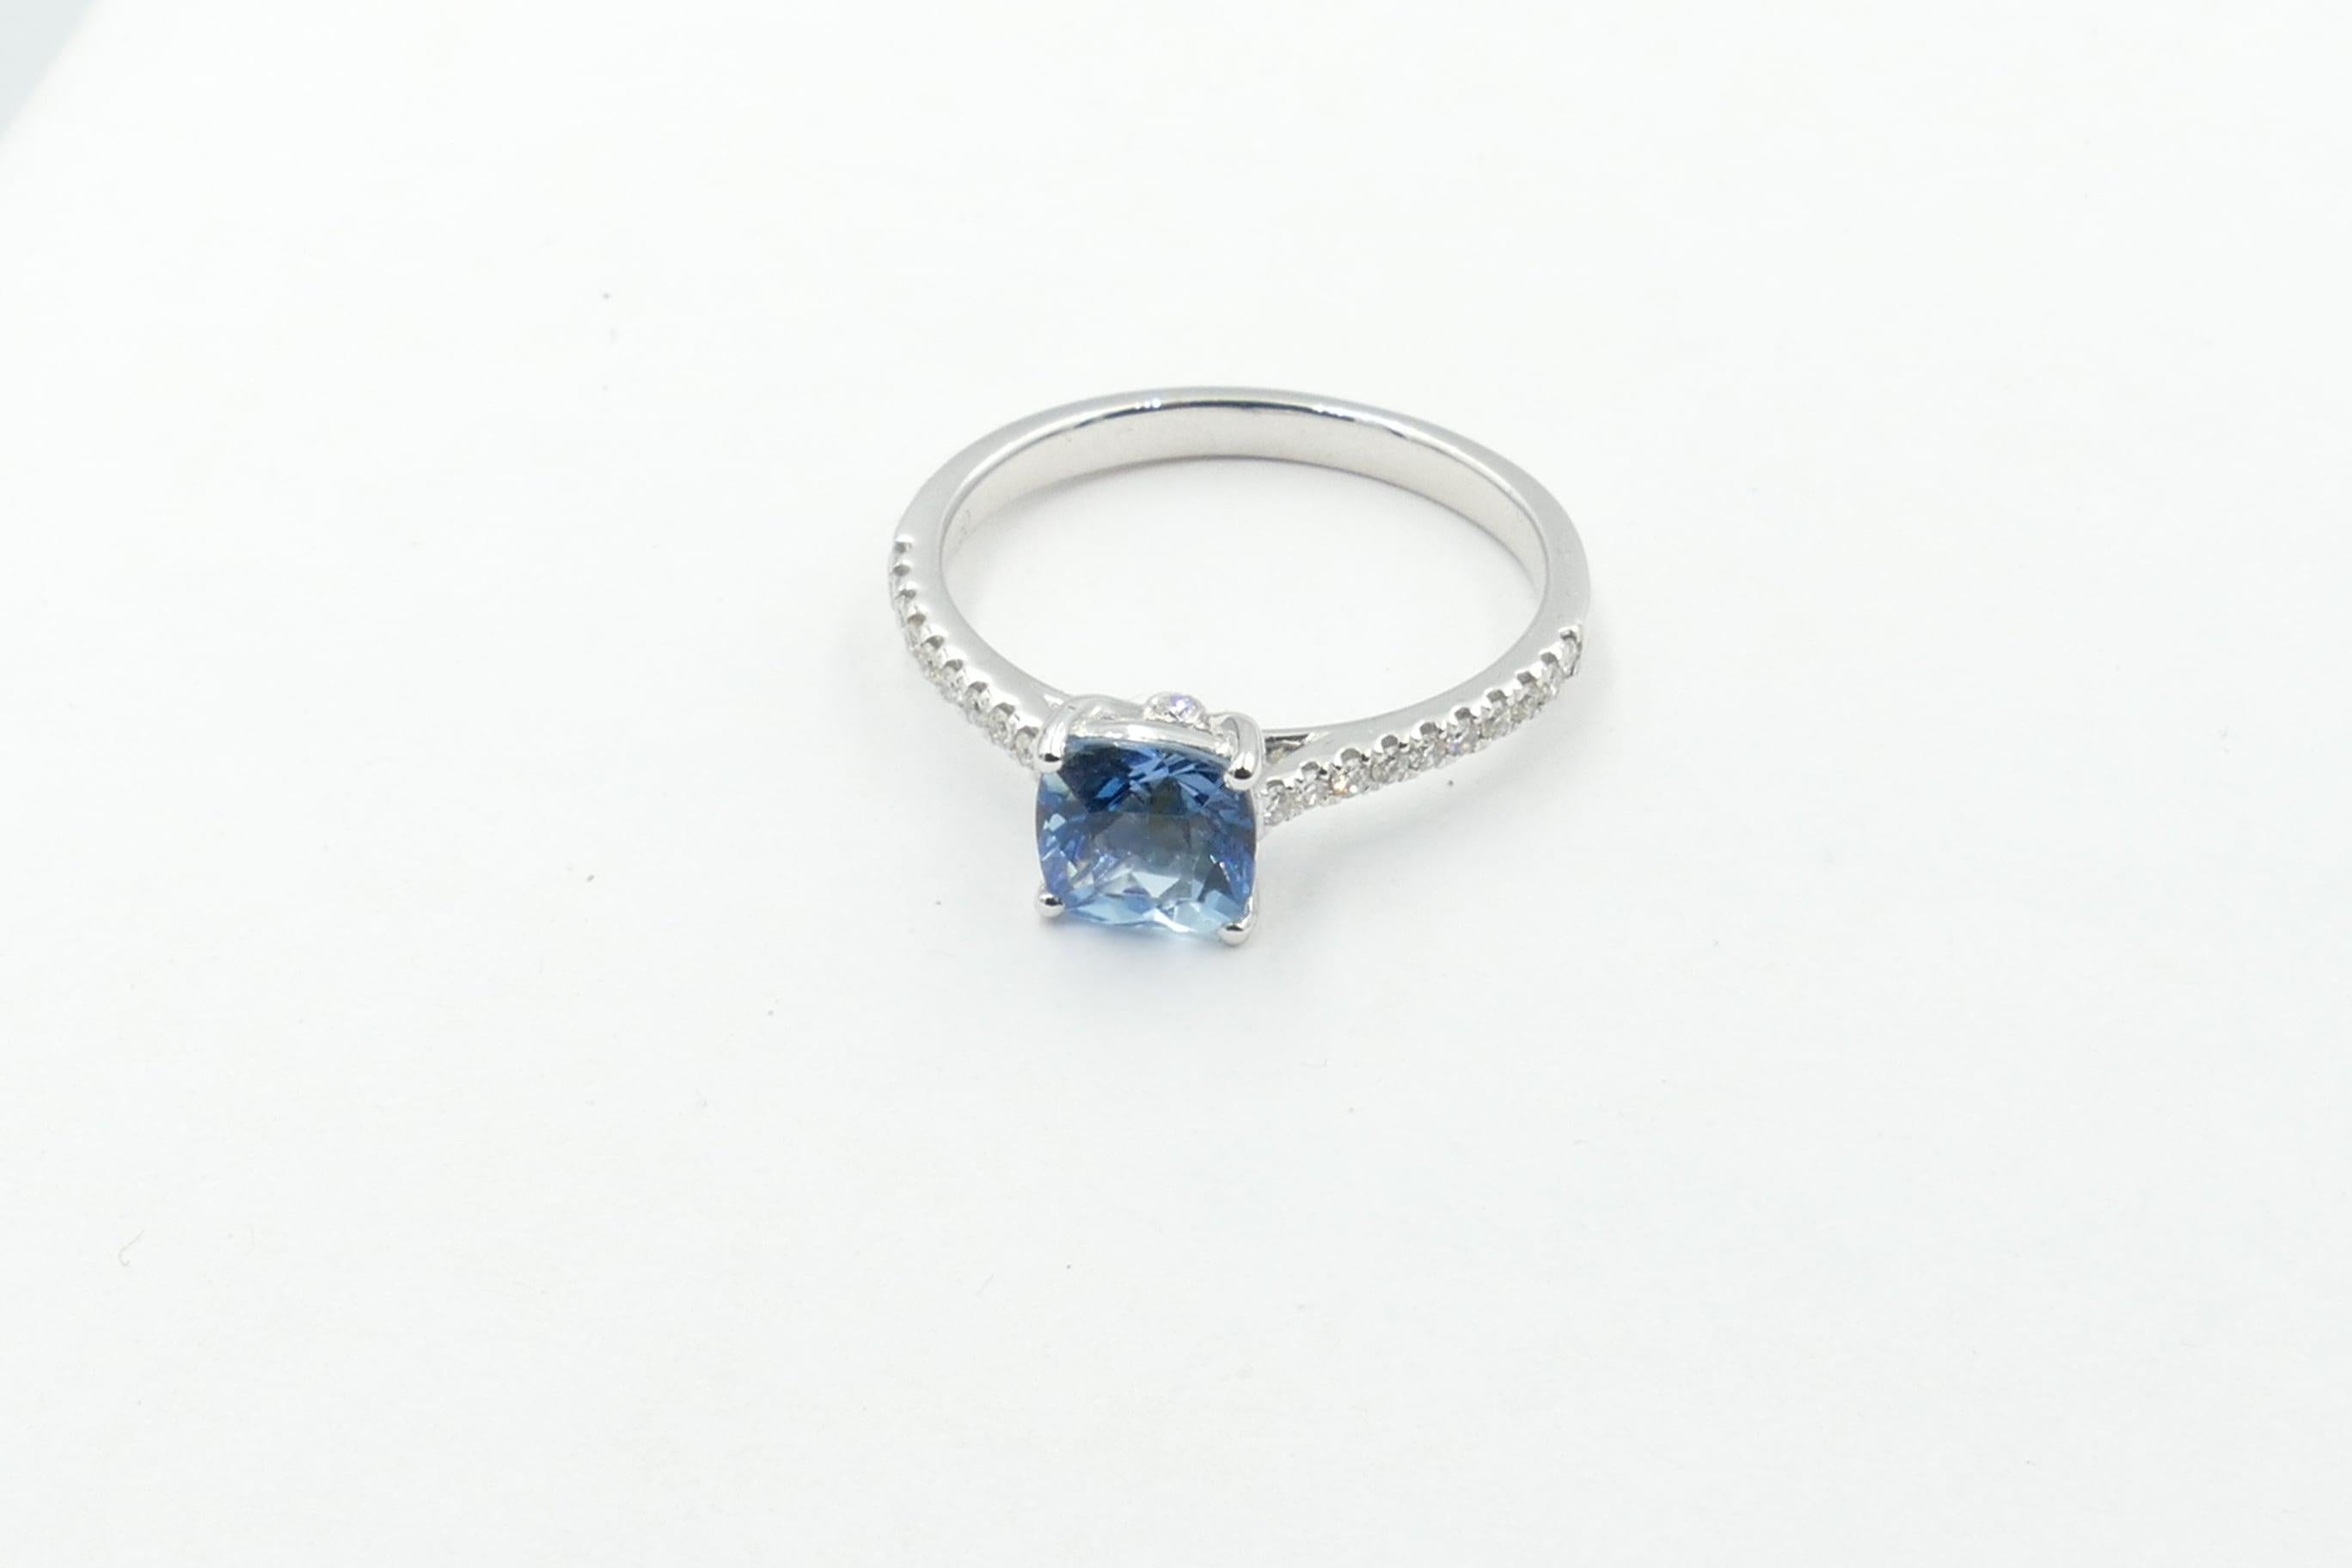 This exceptional quality grade, very pretty mid blue Aquamarine Stone is set in a Band of high level Diamonds. 
The Aqua Stone is 1.02 Carats, Square Cushion Cut, 4 Claw set, Clarity Eye-clean & Tone medium.
There are 20 Diamonds set into the Band,